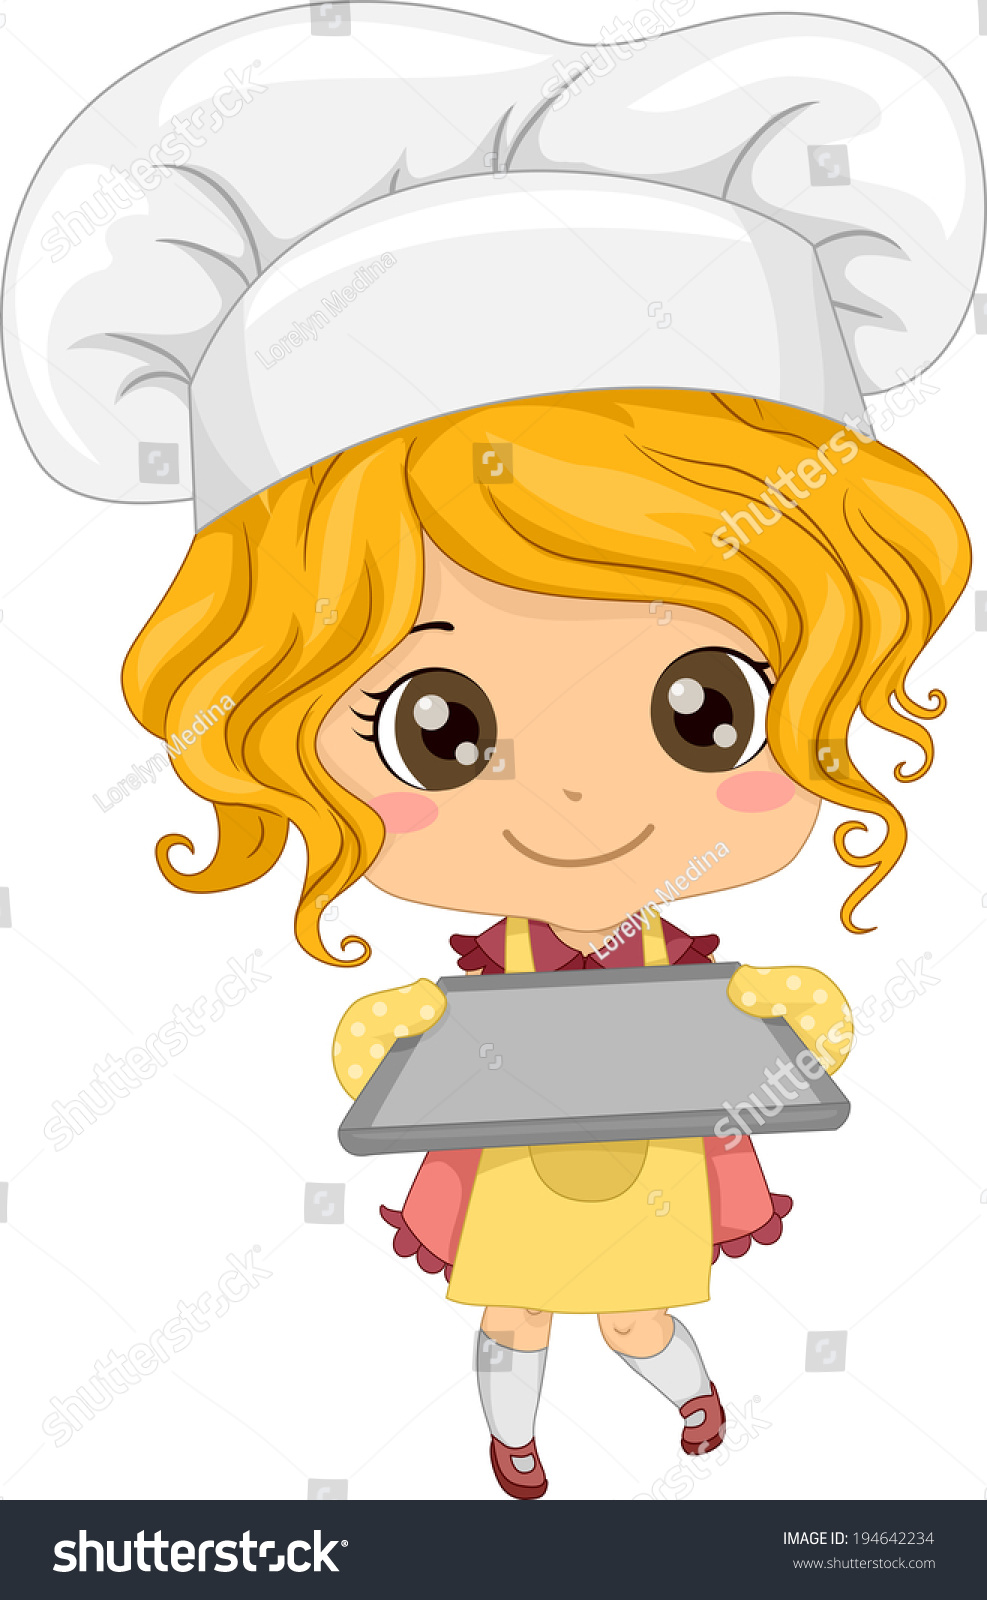 Illustration Of A Little Girl Wearing A Toque Holding An Empty Baking ...